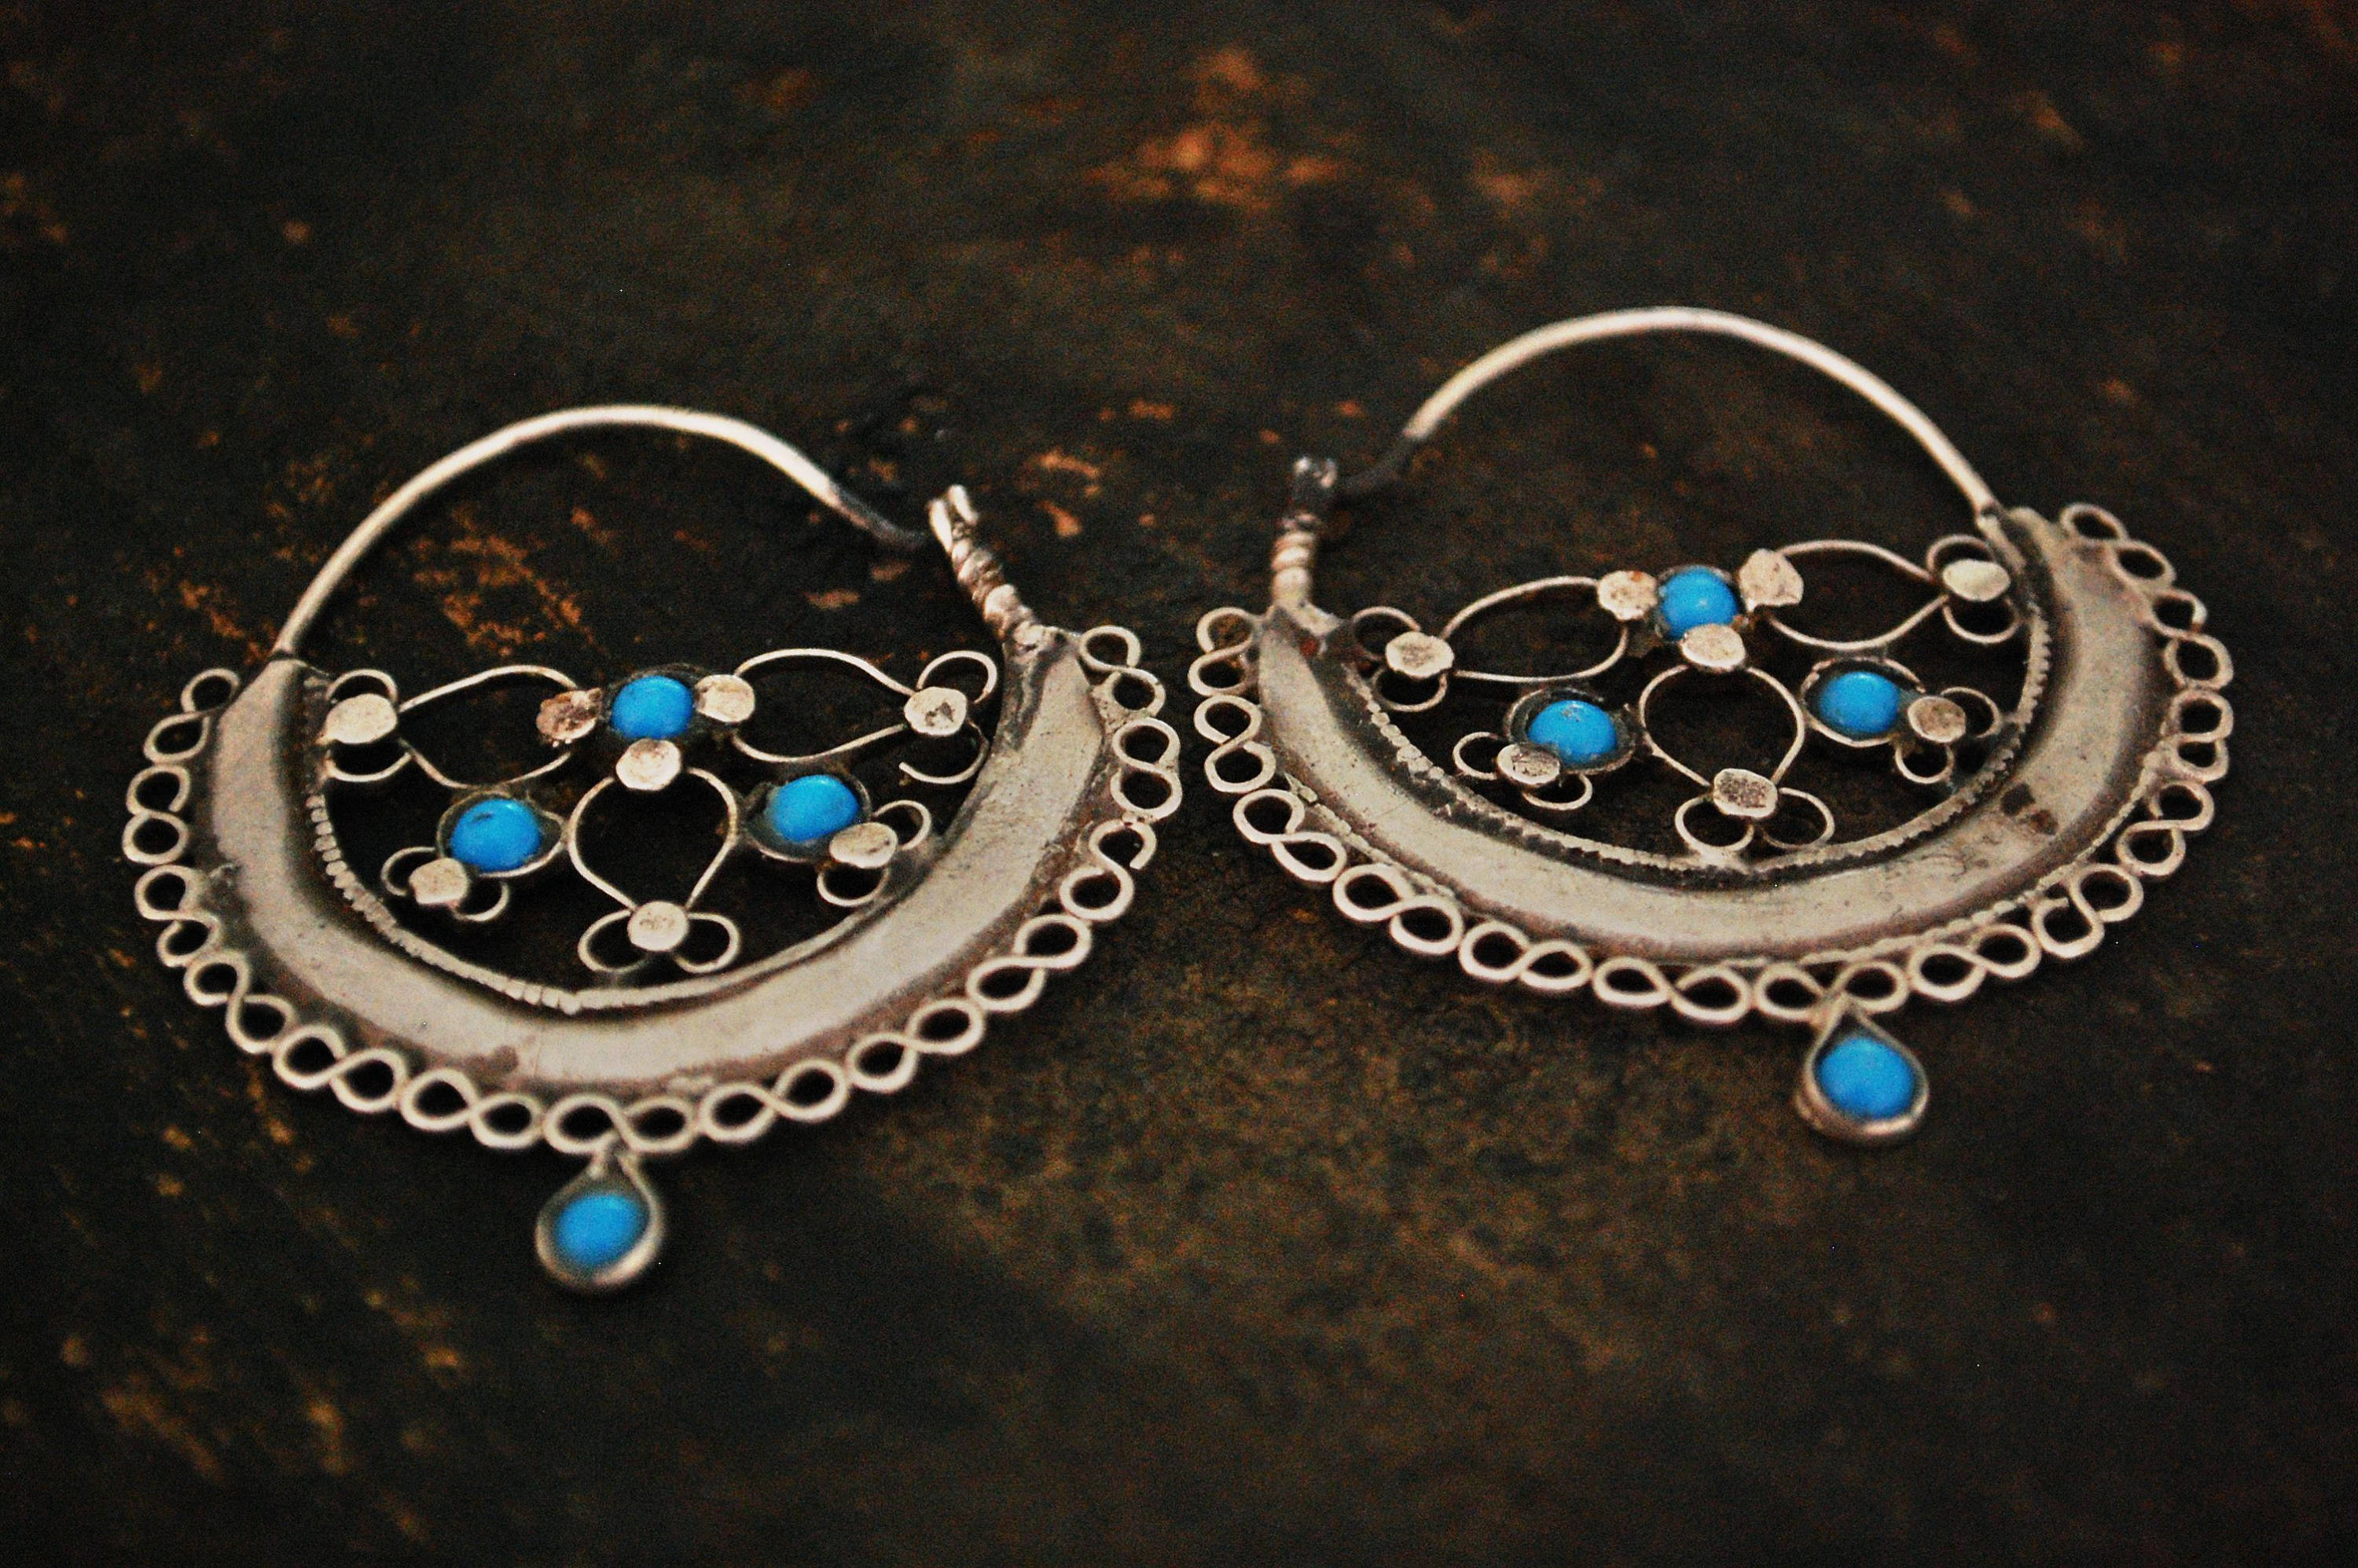 Antique Afghani Hoop Earrings with Turquoise - Afghani Earrings - Afghani Jewelry - Ethnic Hoop Earrings